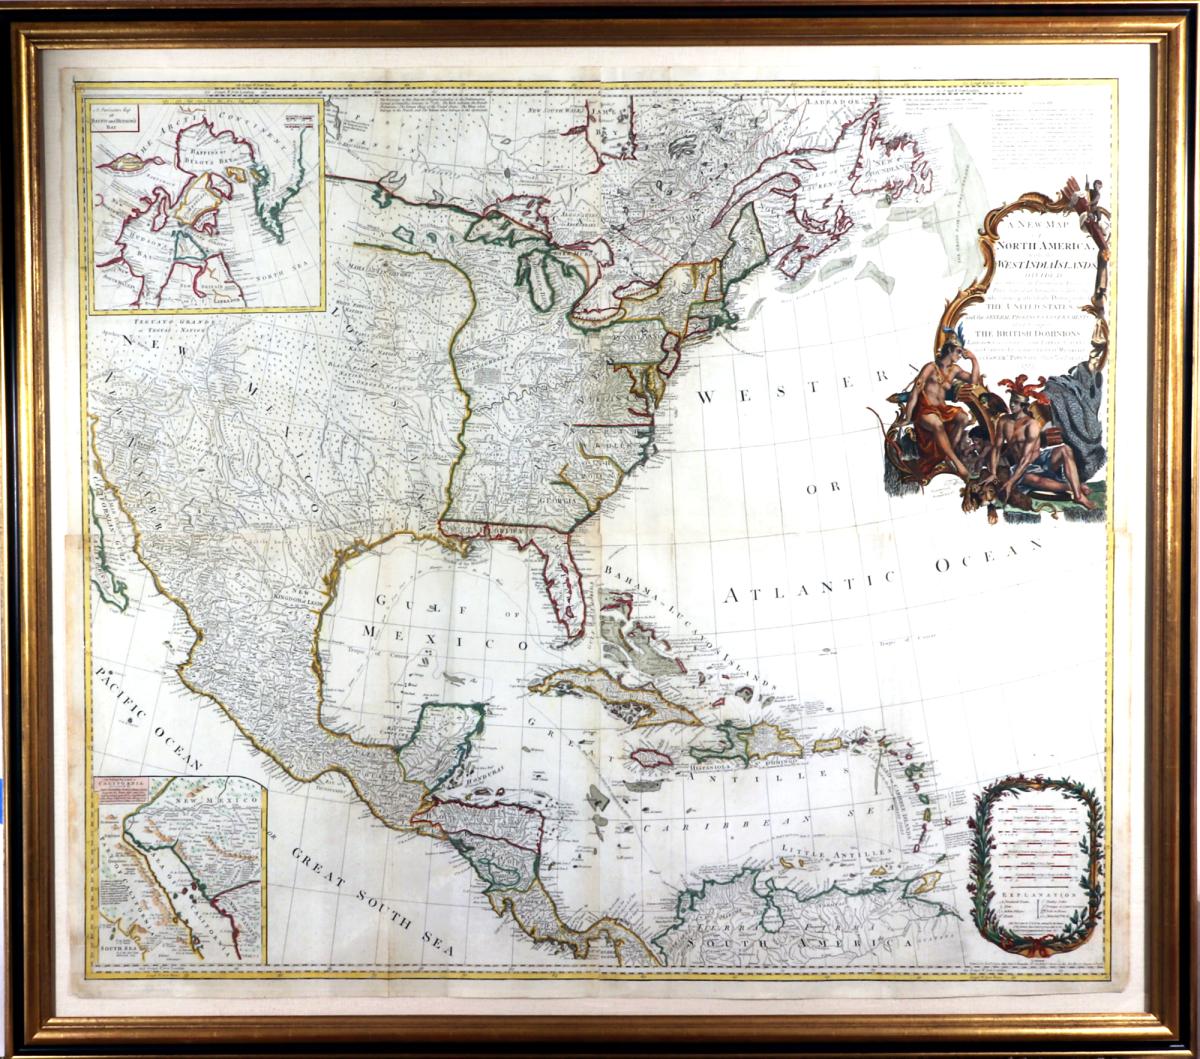 A New Map of North America, with the West India Islands...according to the latest surveys, and corrected from the original materials, of Goverr. Pownall, Member of Parliamt